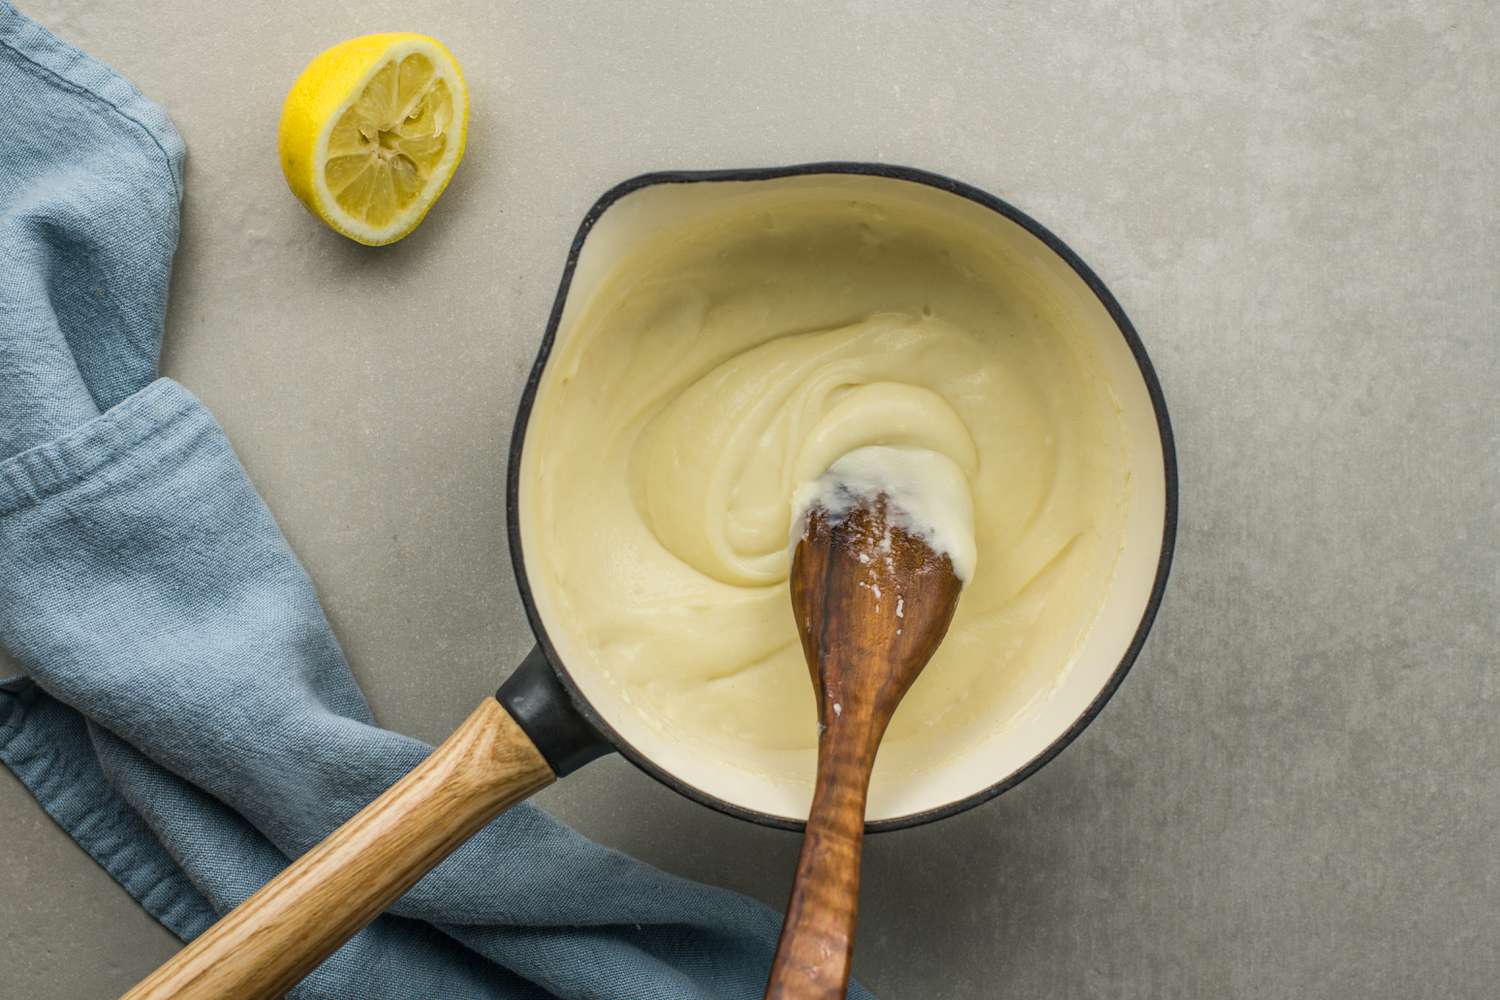 Milk and flour mixture with lemon in a pan